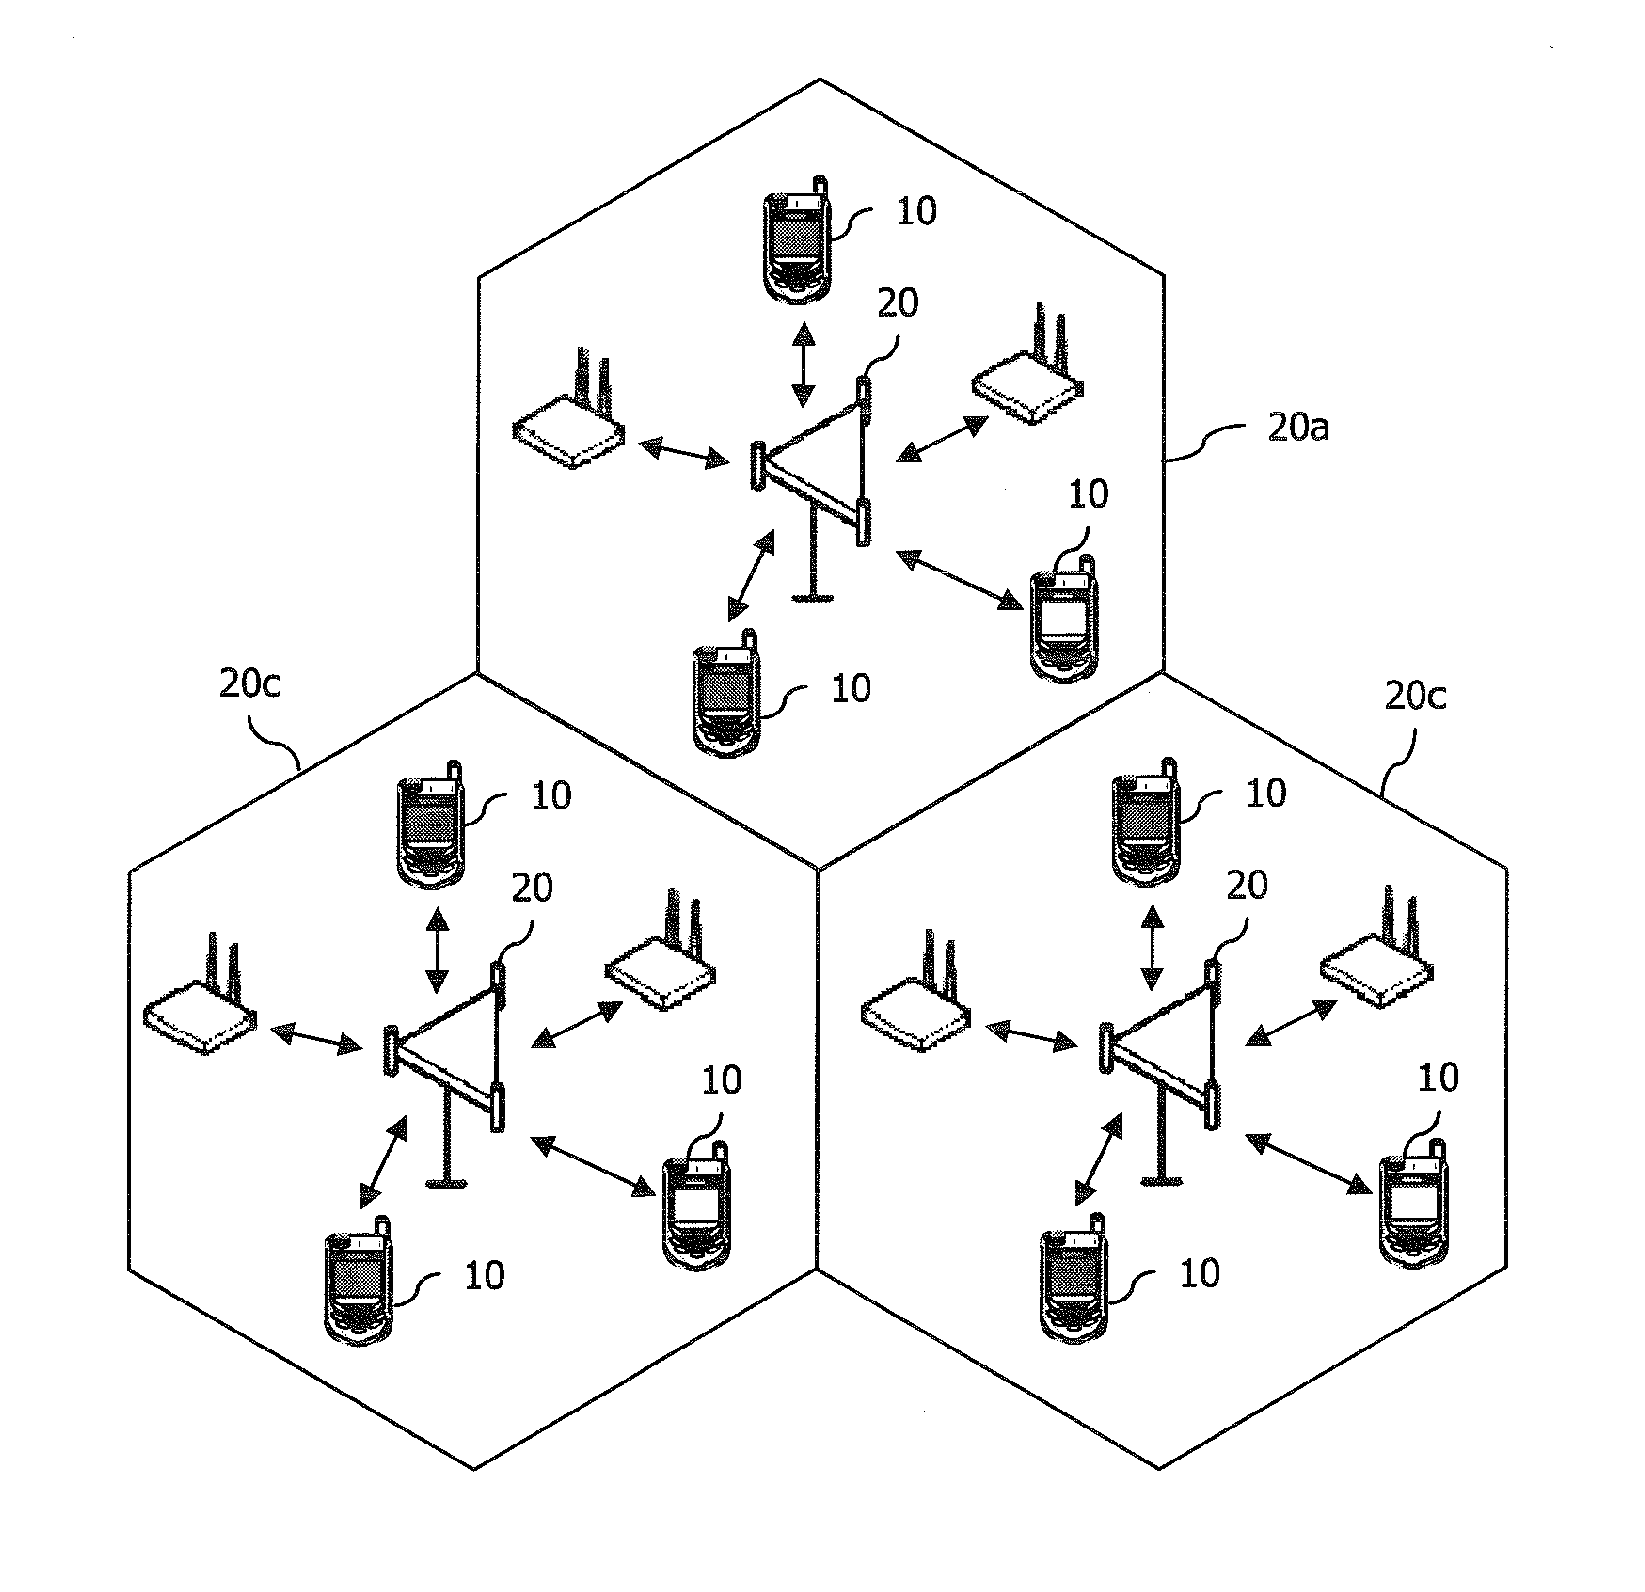 Method of performing cell measurement and method of providing information for cell measurement